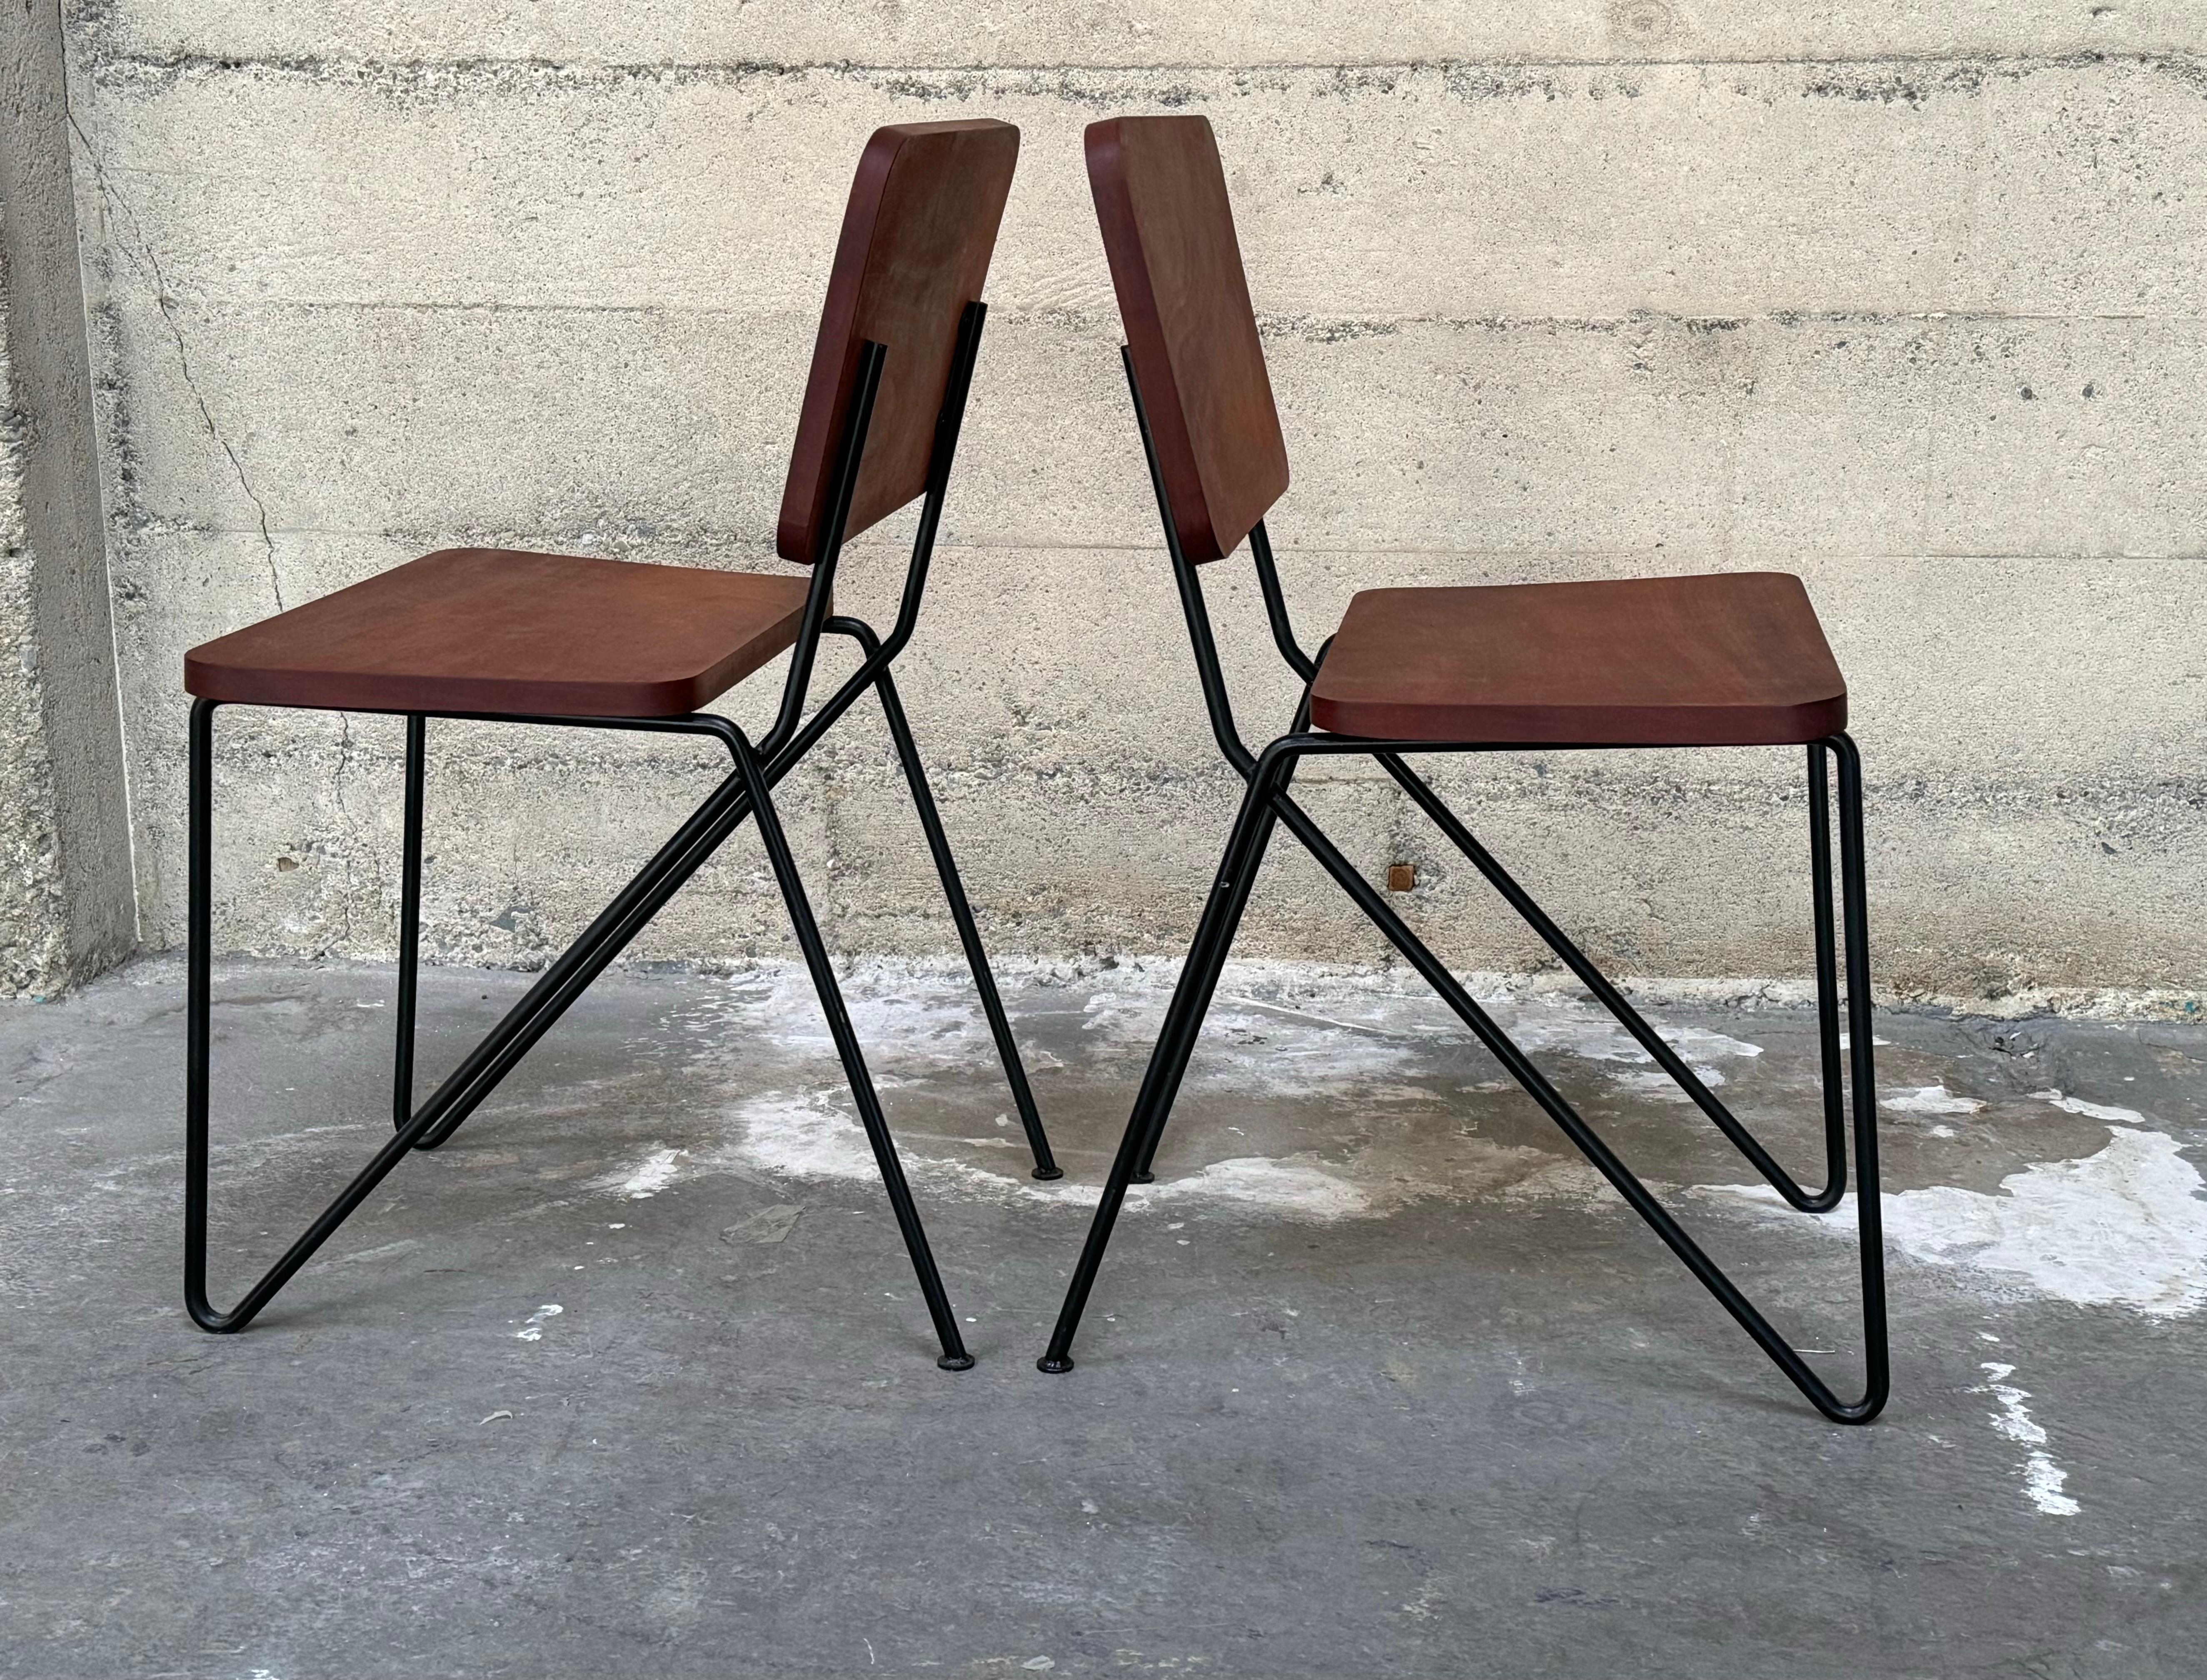 Pair of 1950s California Design Iron and Tropical Hardwood Side Chairs For Sale 5